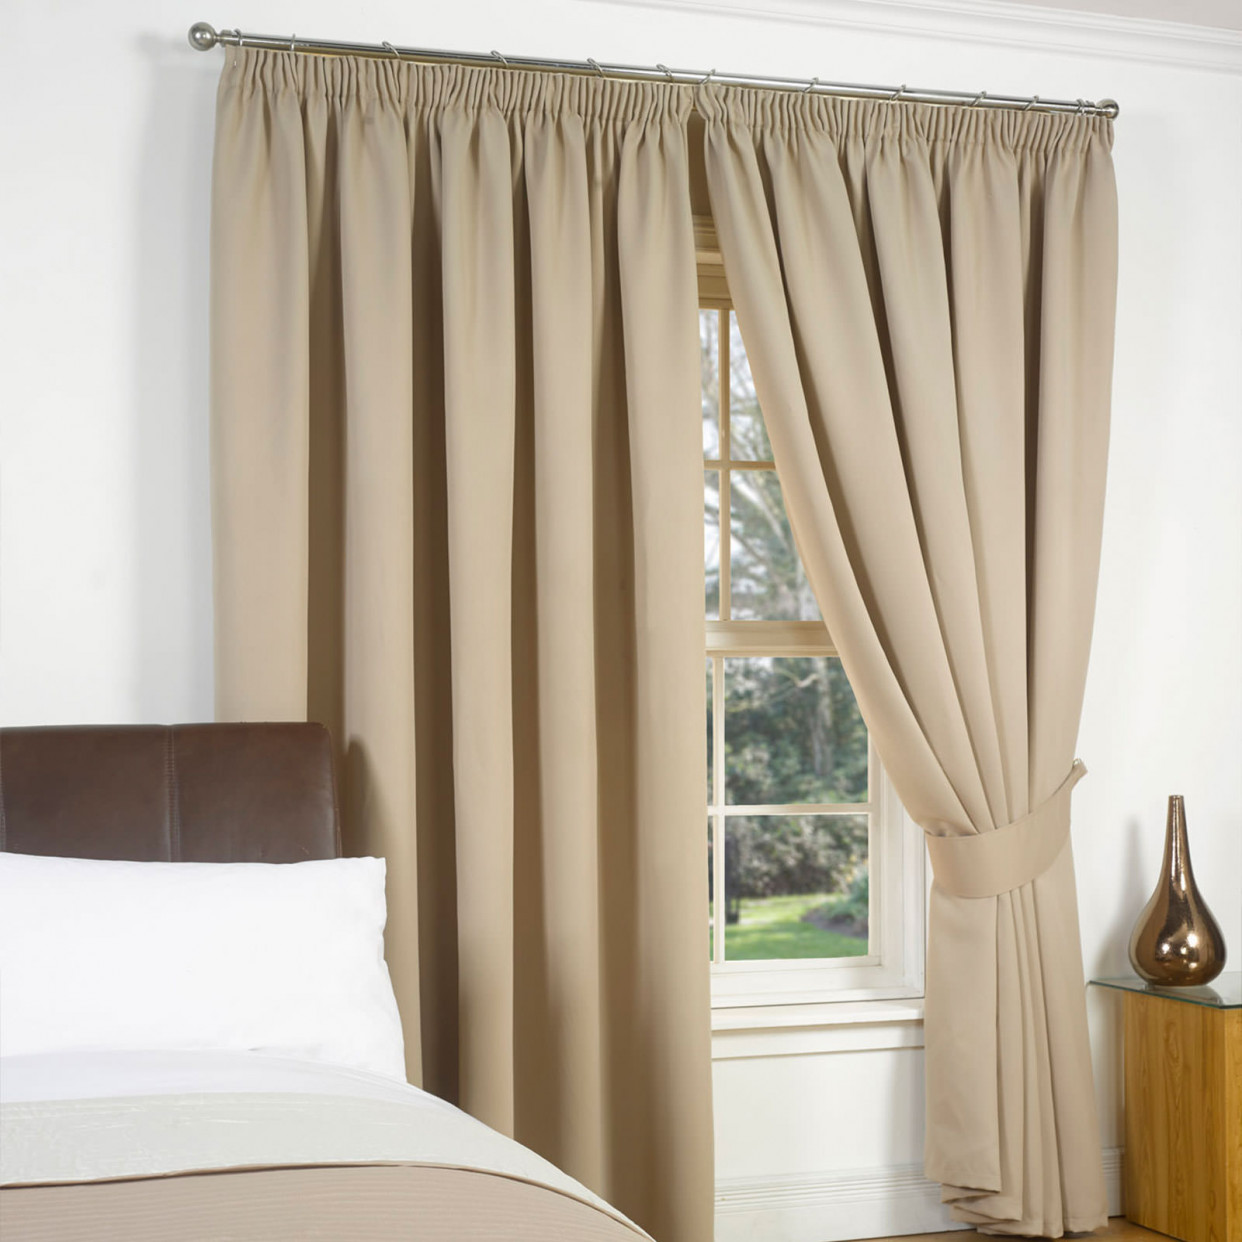 Pencil Pleat Thermal Blackout Fully Lined Curtains - Beige 66x72>